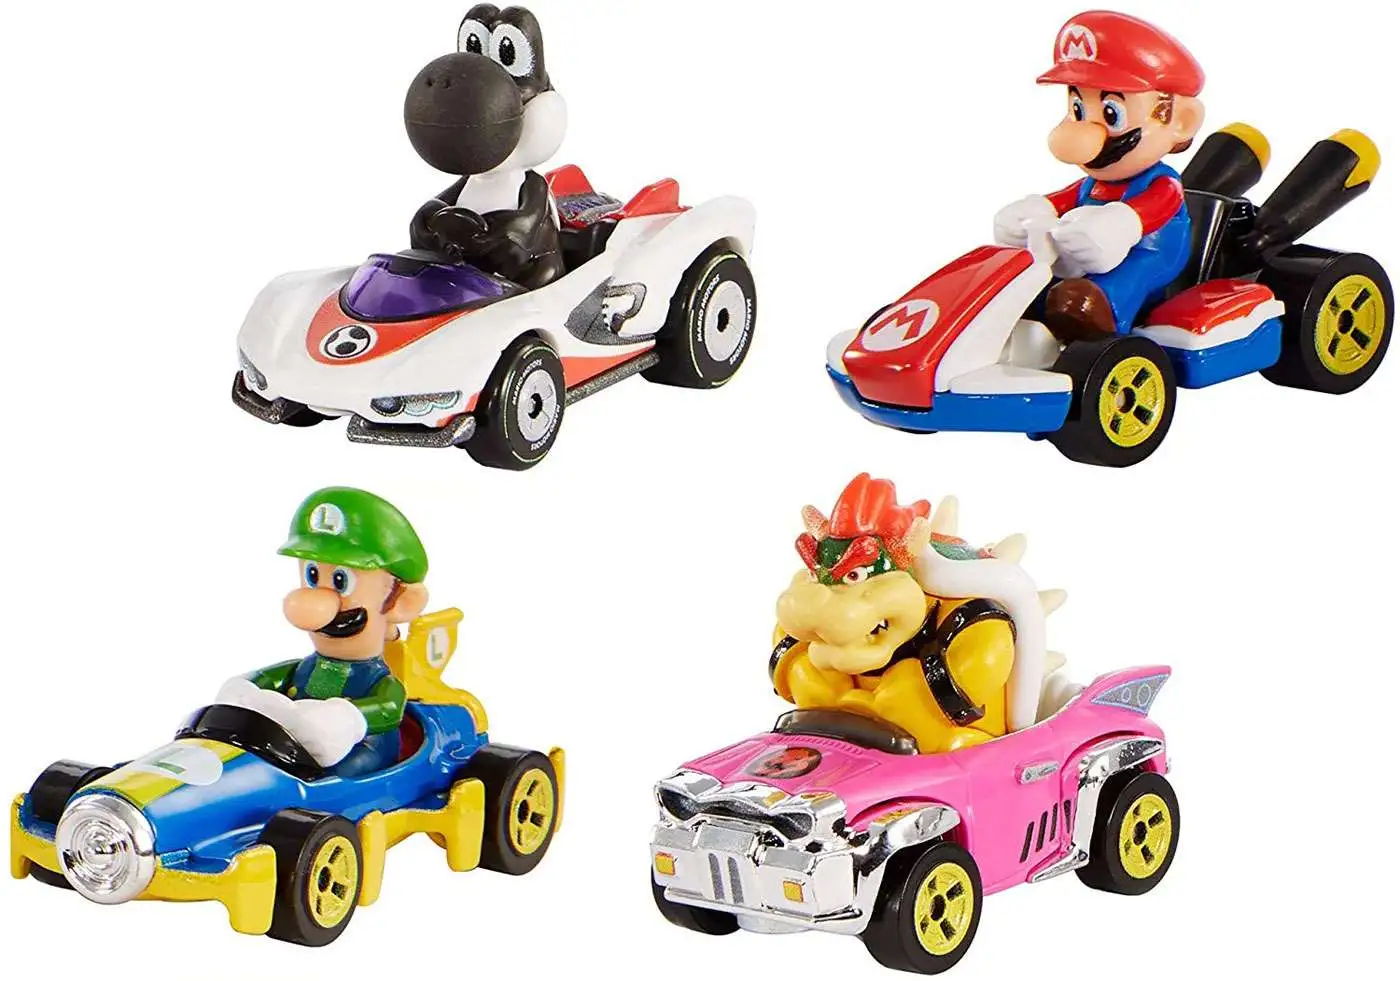 HOT WHEELS MARIO KART 4-PACK WITH EXCLUSIVE BLACK YOSHI New In Box 